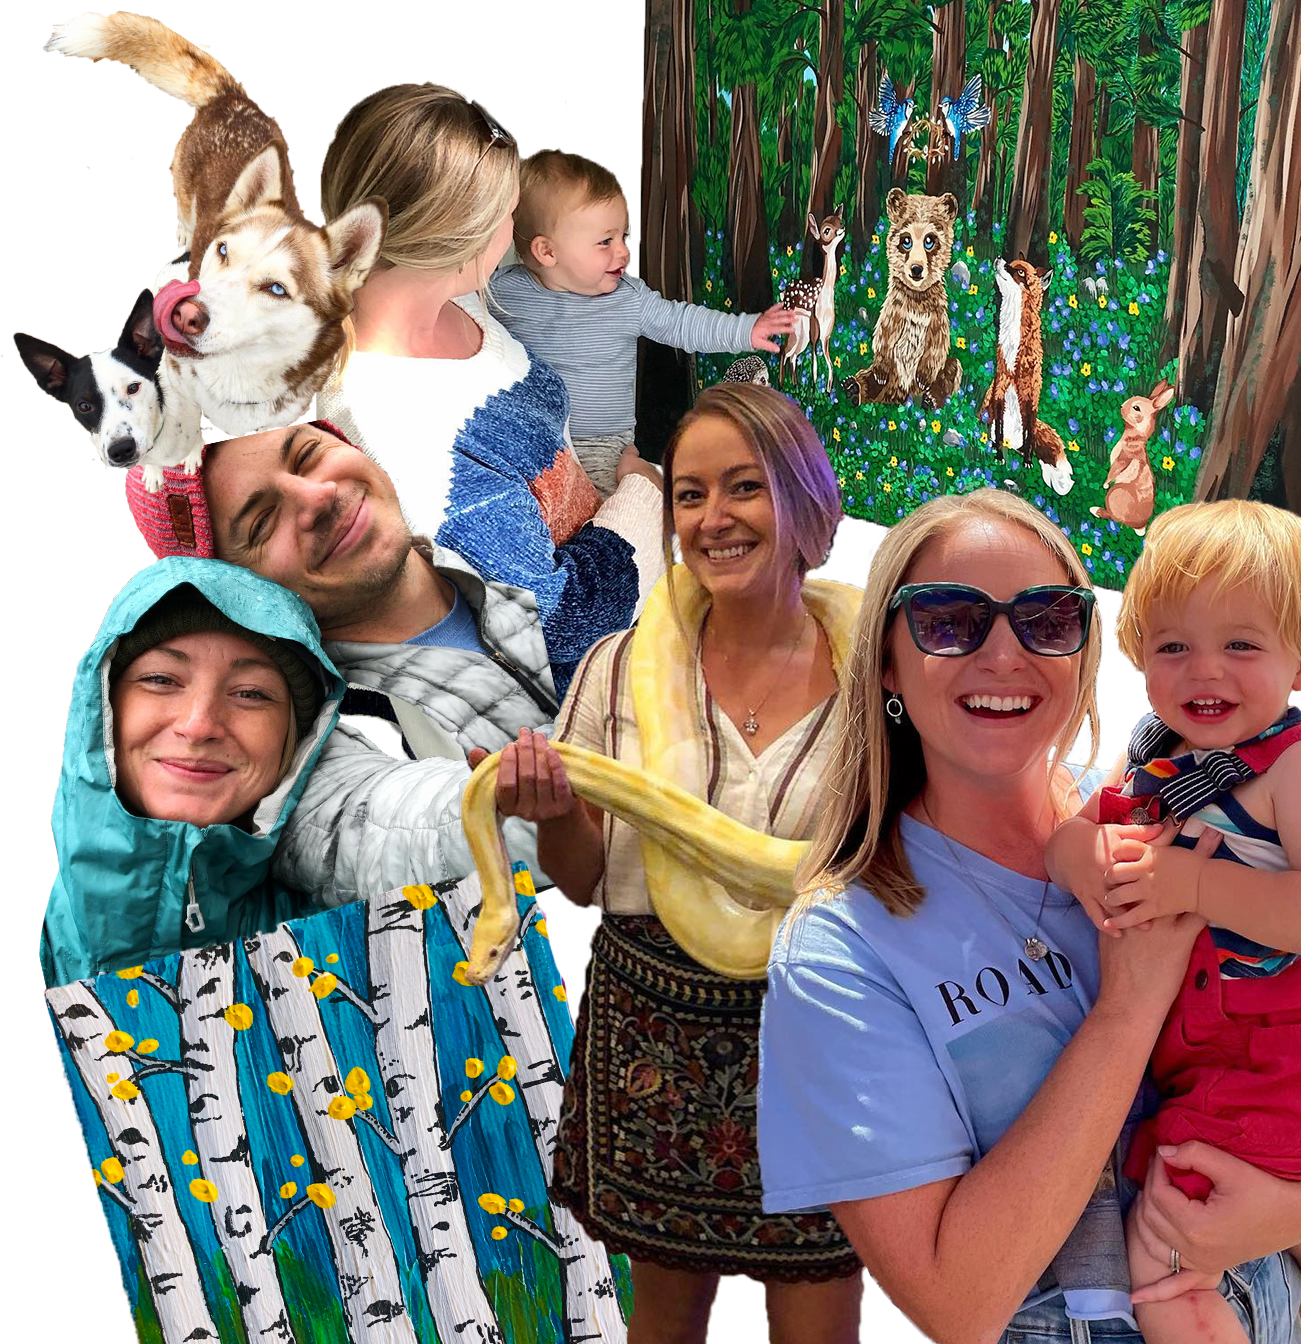 UX chief, Kate, in a family collage with animals